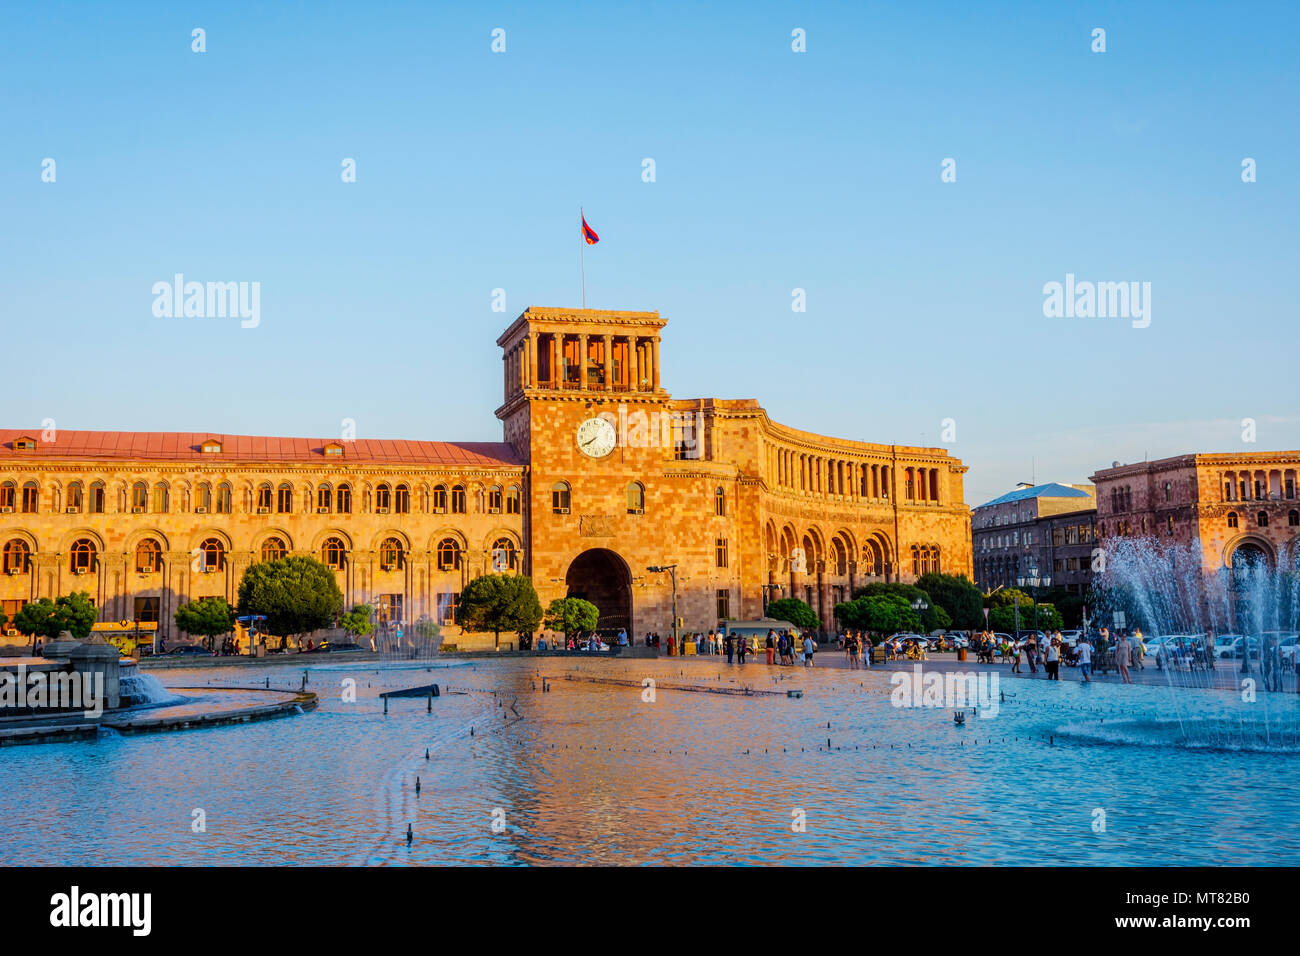 YEREVAN, ARMENIA - AUGUST 2: Republic square with the fountain and clock tower in Armenia capital. August 2017 Stock Photo